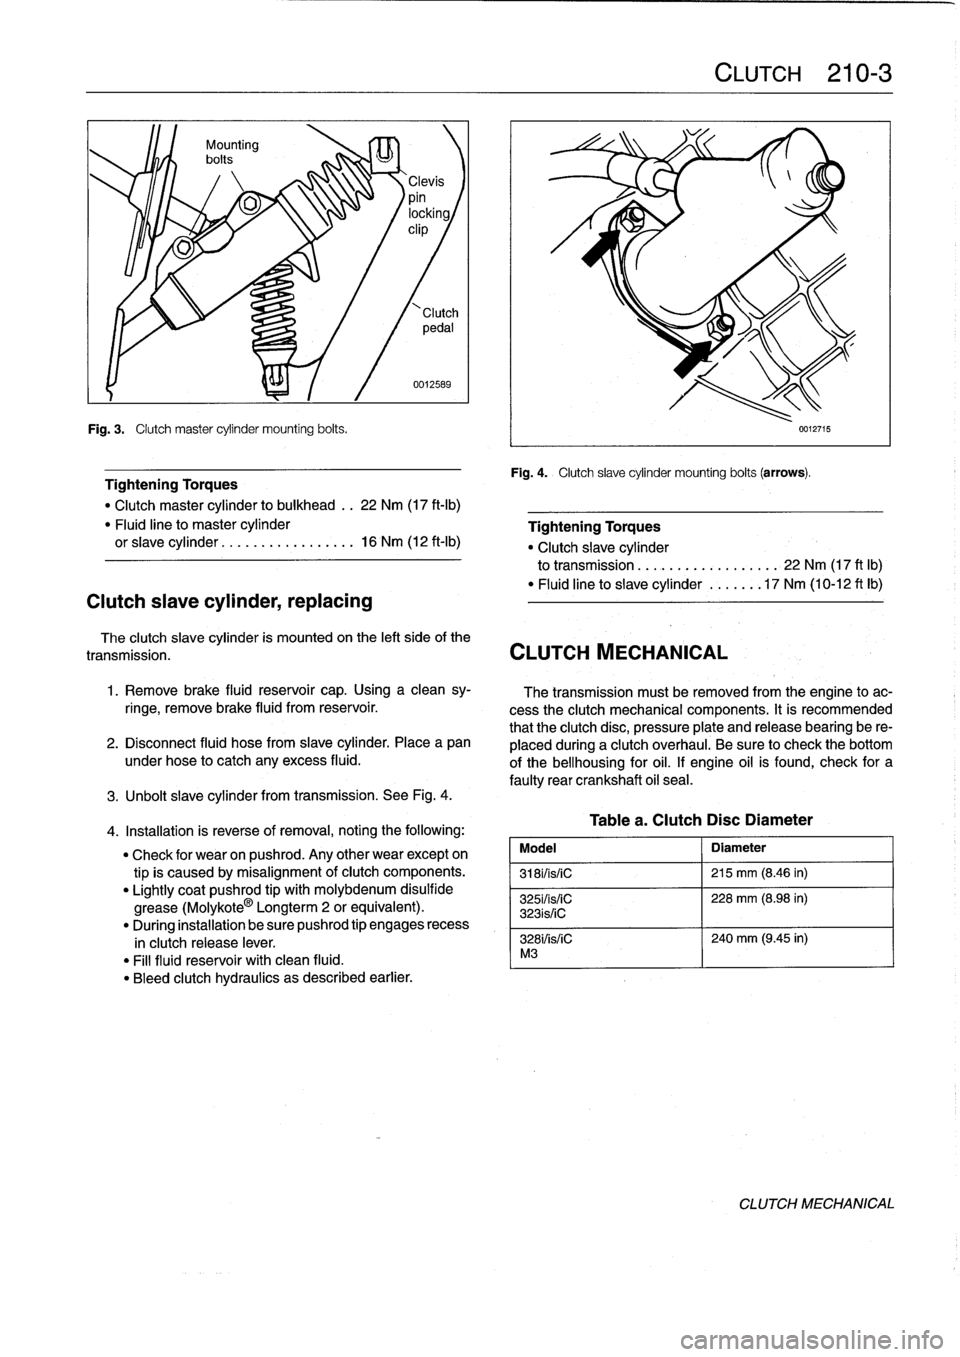 BMW M3 1995 E36 Owners Guide Fig
.
3
.

	

Clutch
master
cylinder
mounting
bolts
.

Clutch
slave
cylinder,
replacing

0012589

Tightening
Torques

"
Clutch
master
cylinder
to
bulkhead
..
22
Nm
(17
ft-Ib)
"
Fluid
line
to
master
cy